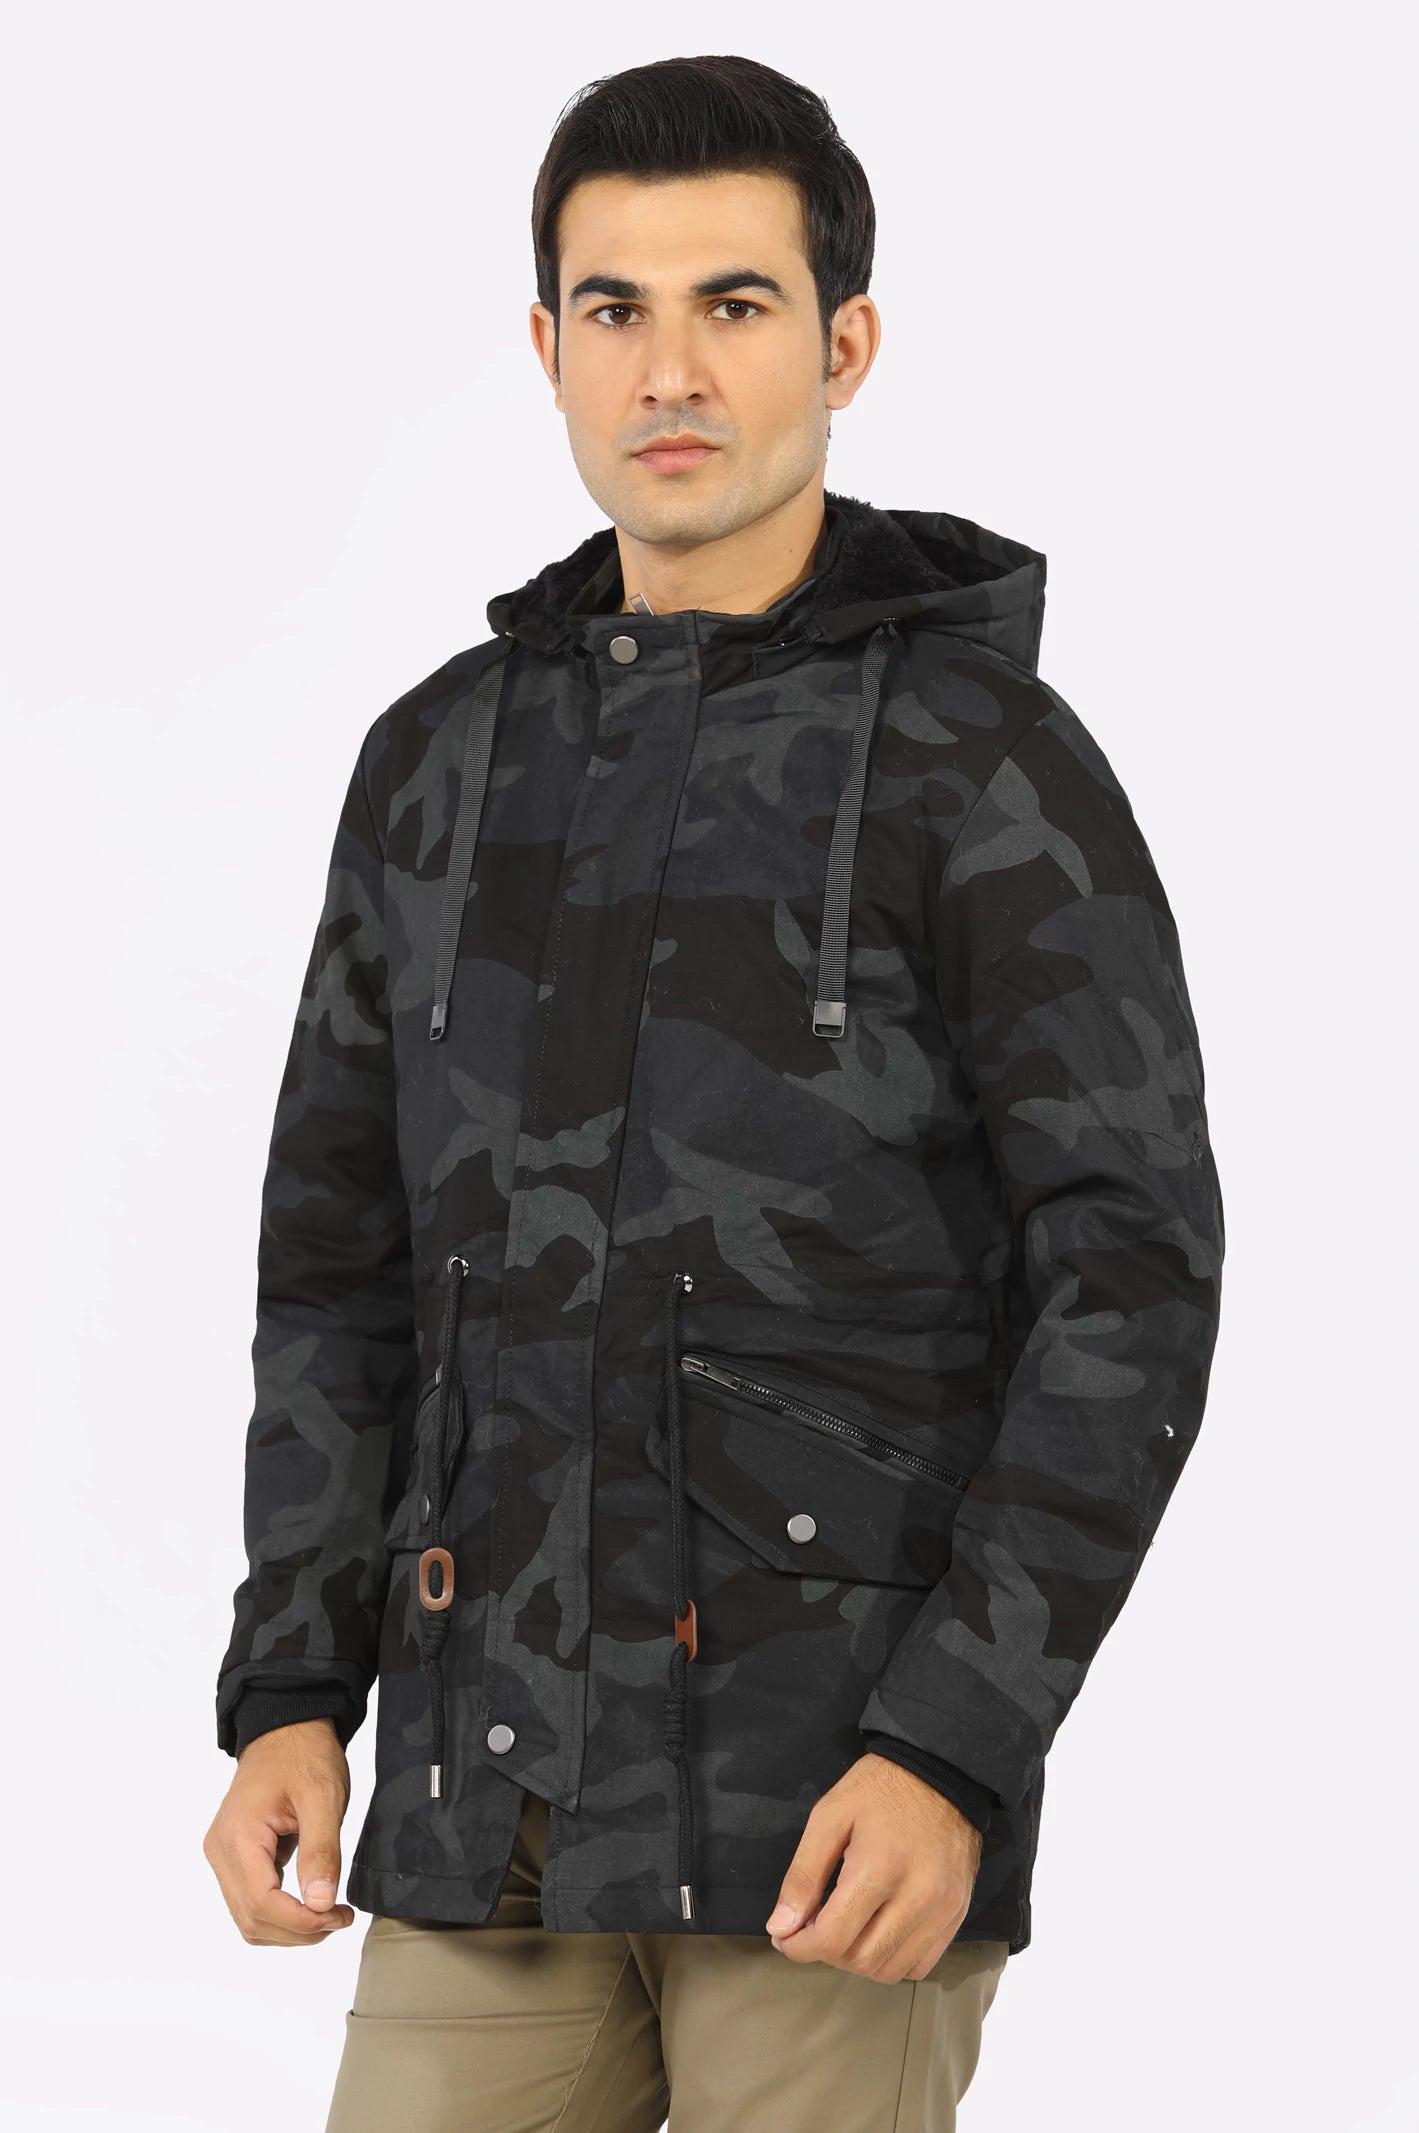 CHARCOAL CAMOUFLAGE JACKET, UNDEFINED, DINERS, MODJEN FOR THE MODERN  GENERATION